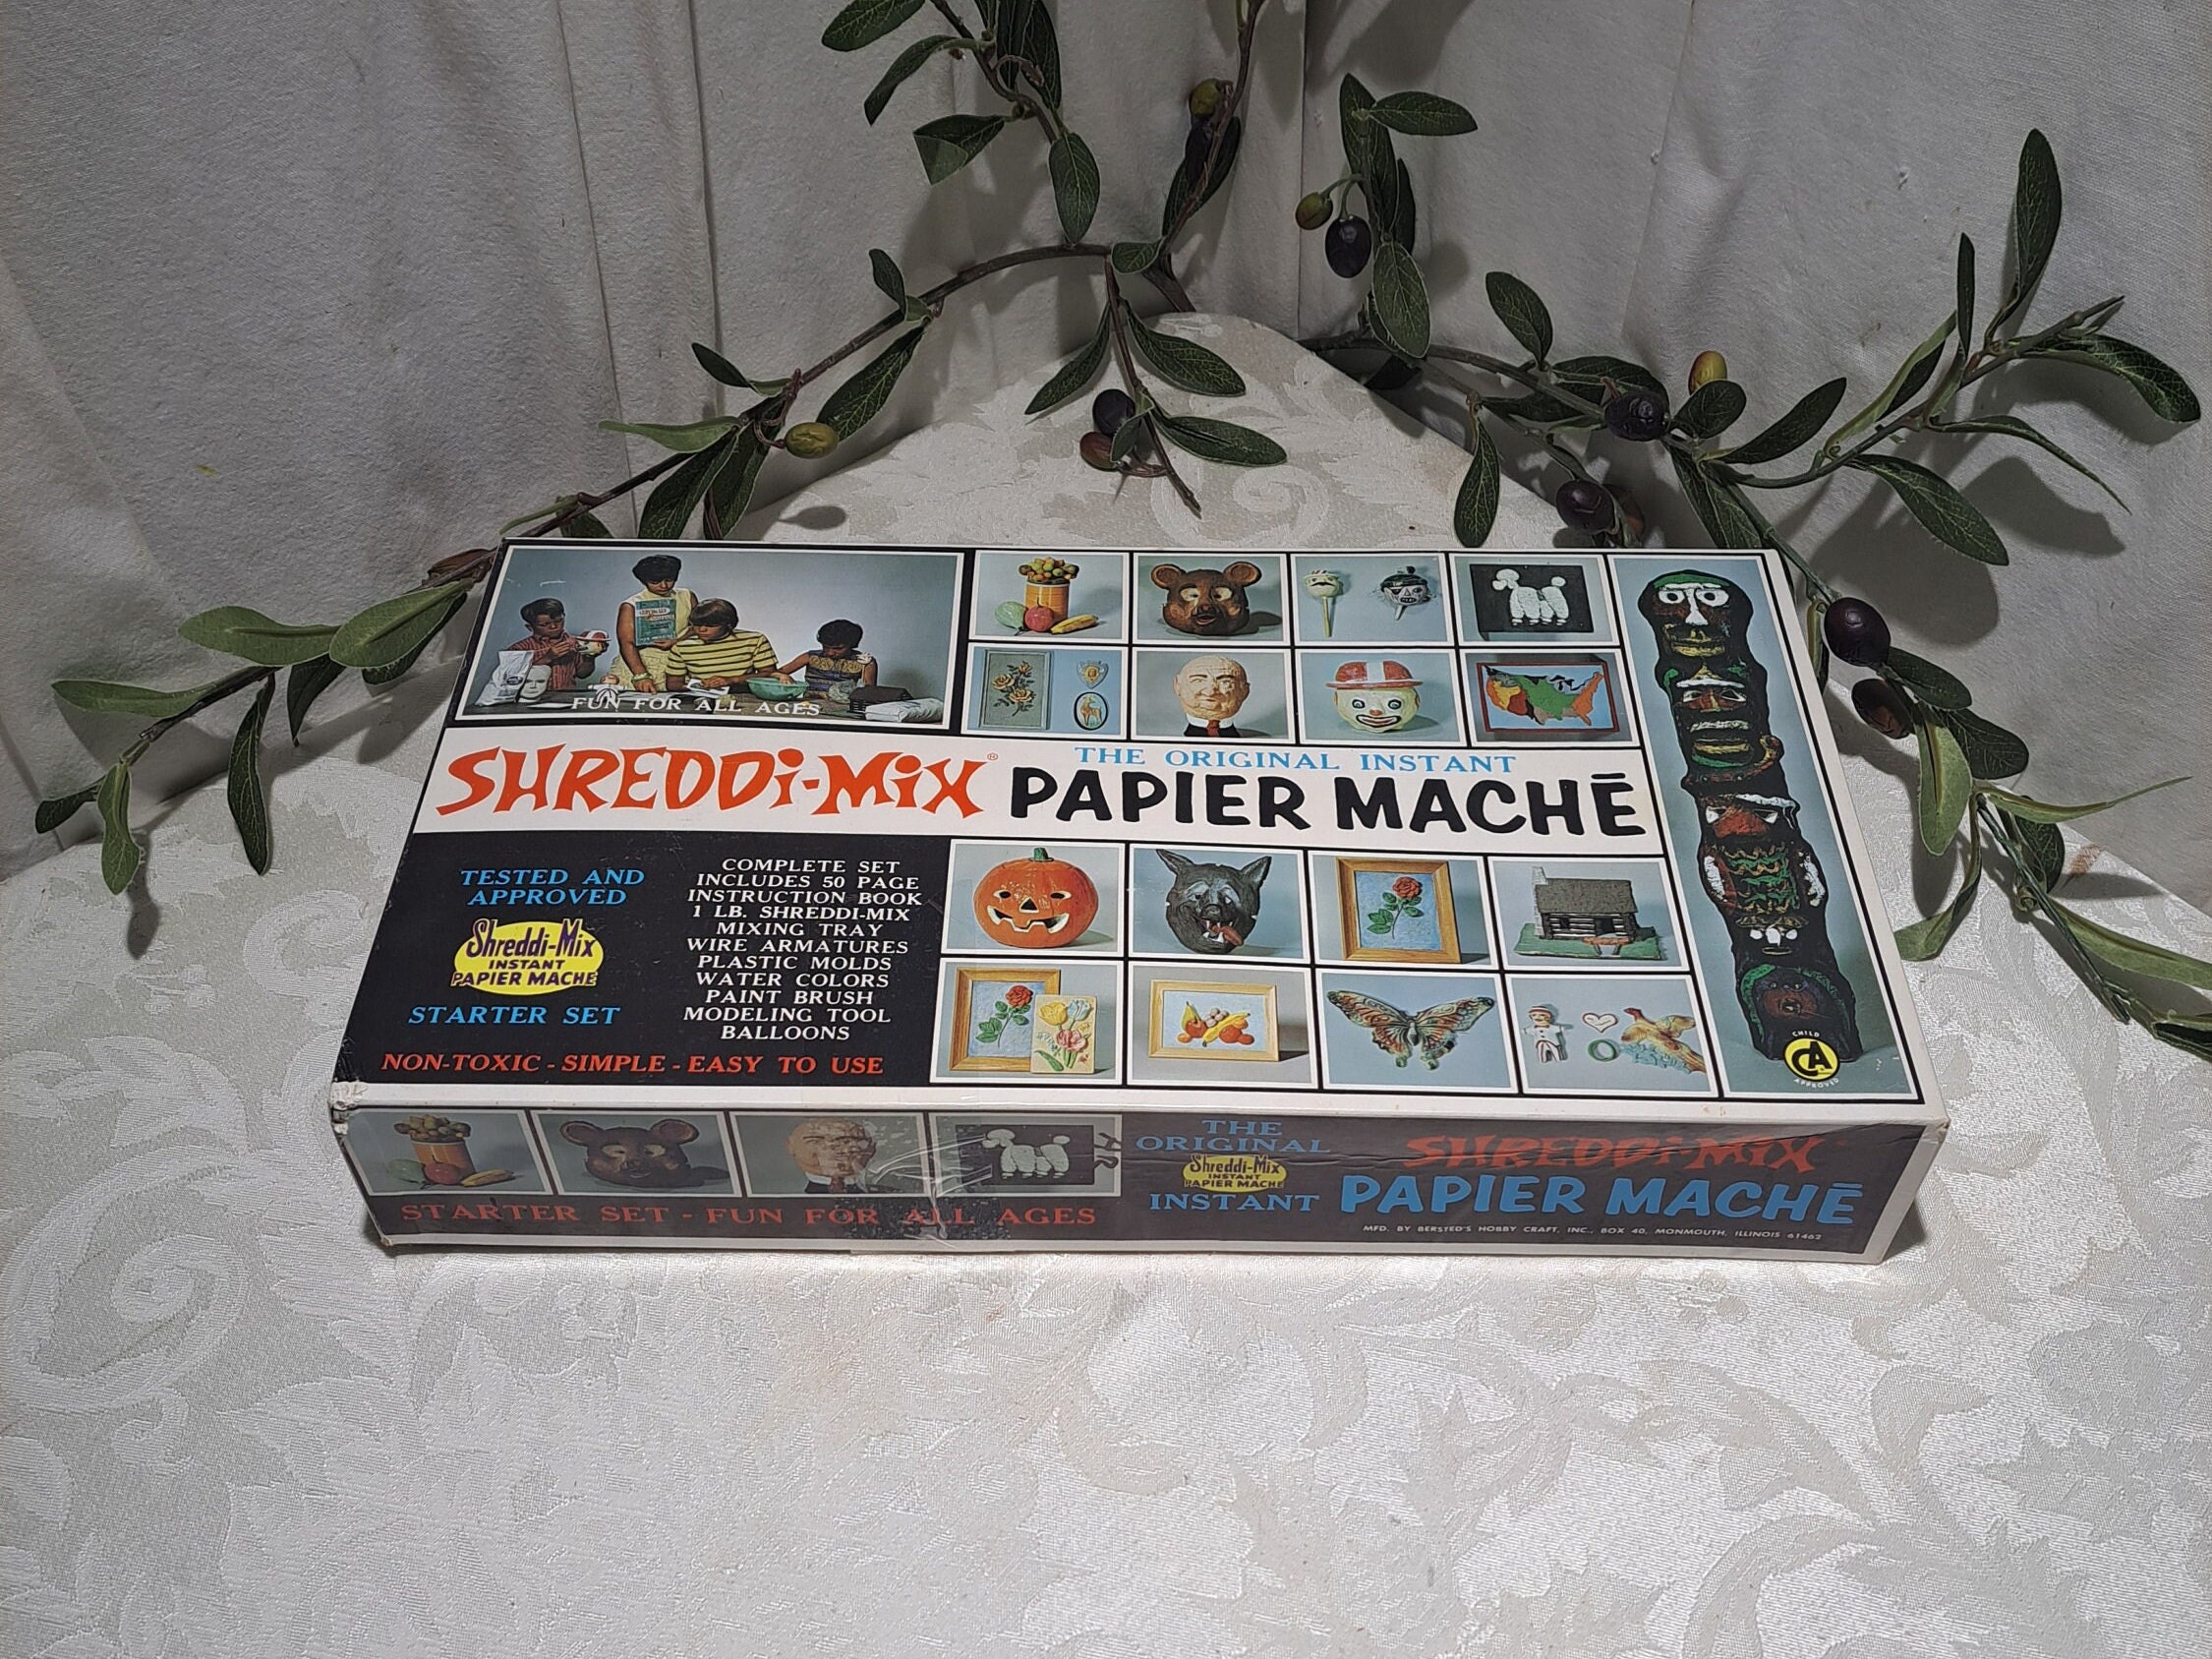 Rare Hard to Find Vintage 1965 the Original Instant SHREDDI-MIX Paper Mache  Kit Set by Bersted's Hobby Craft, Inc, Box No.40 